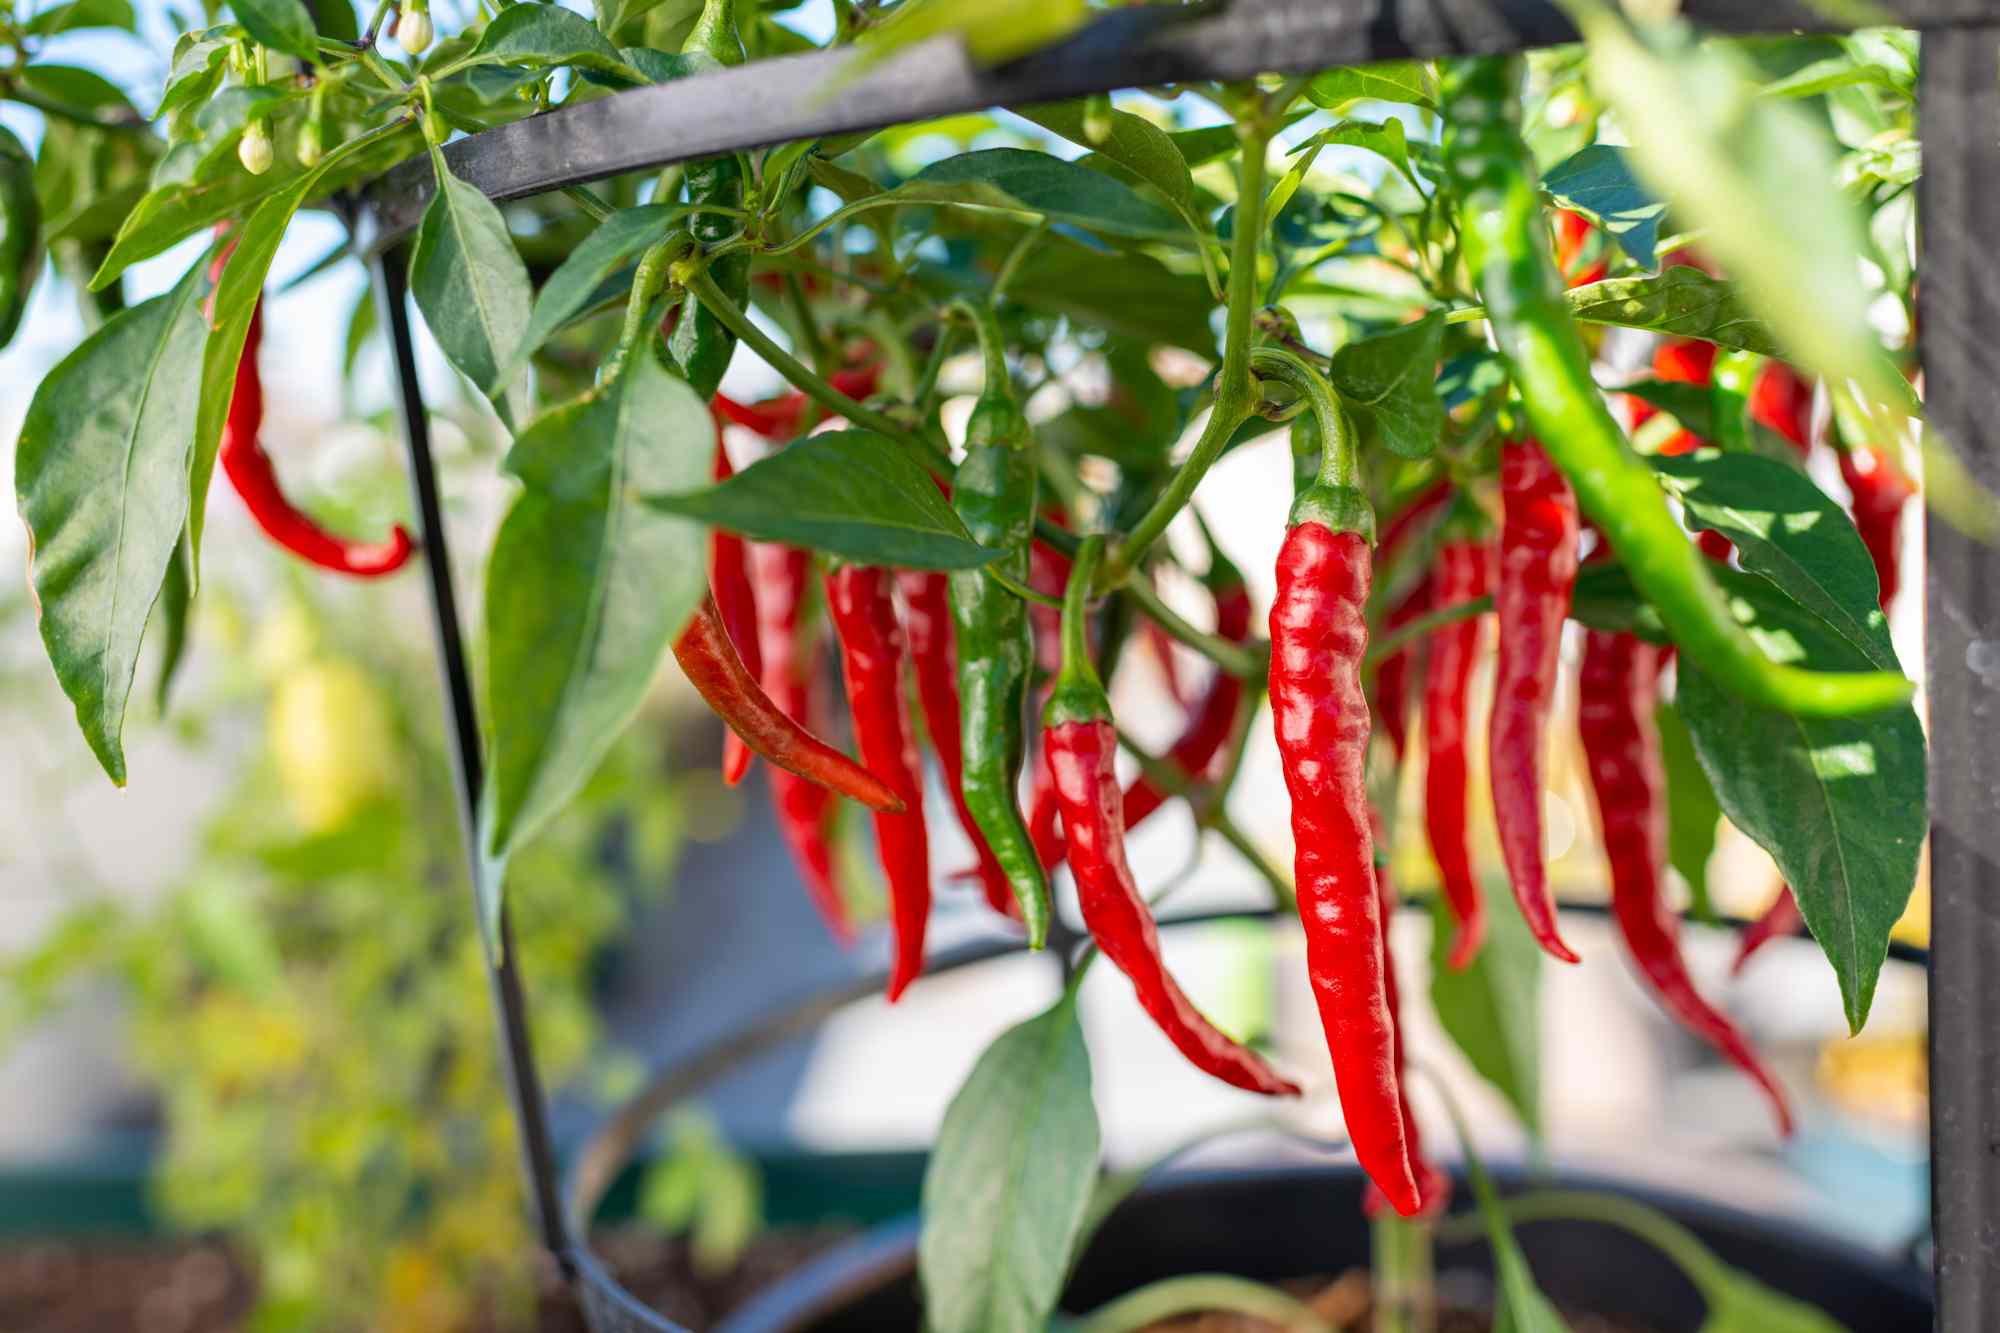 How To Grow Chili Peppers From Seeds